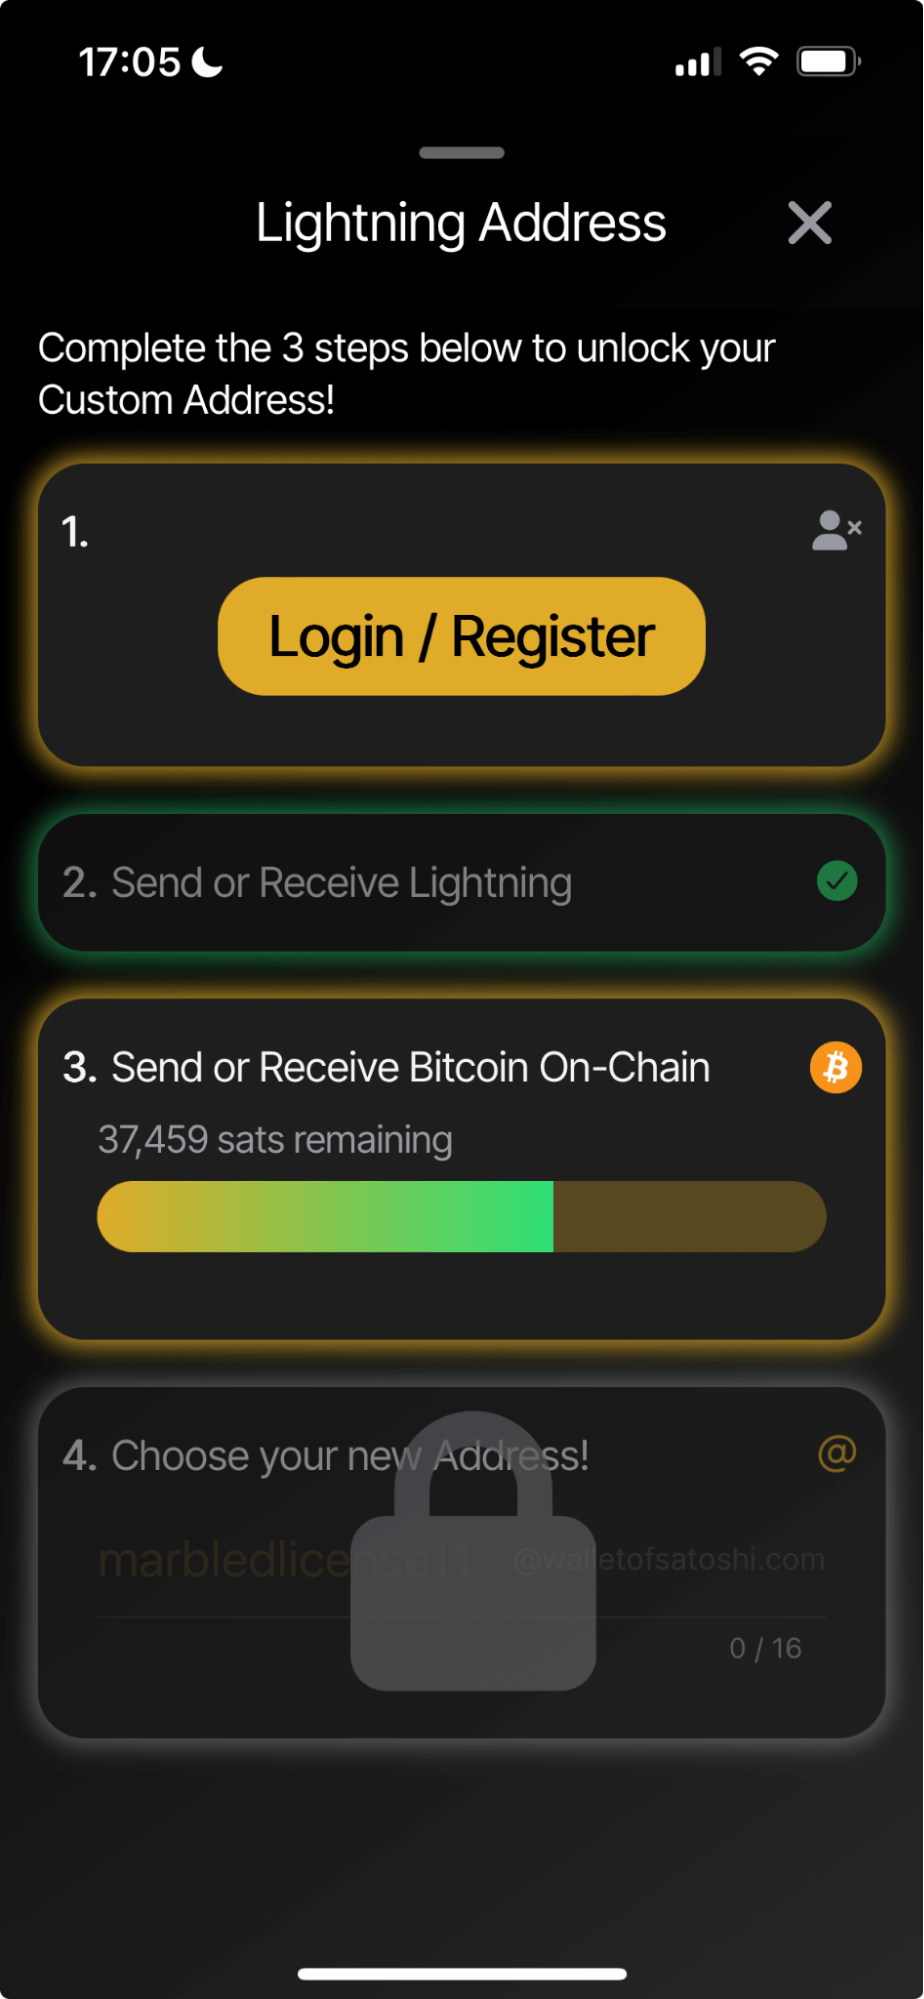 Lightning Address feature in the Wallet of Satoshi